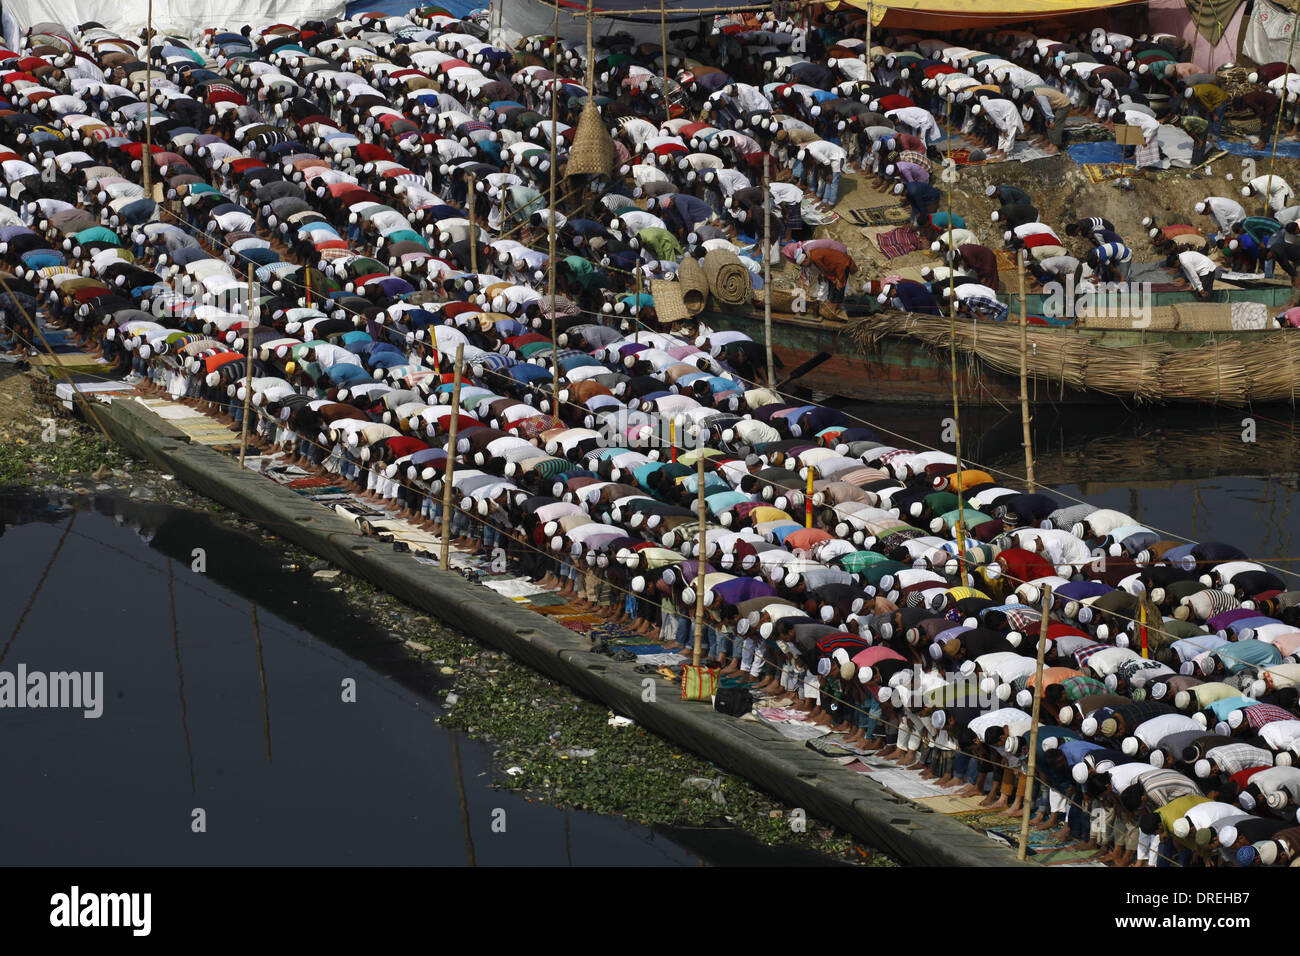 Dhaka, Bangladesh 24th January 2014;Thousands of Muslims attend the Jumma prayer on the banks of the river Turag during the first day of the three-day long Muslim Congregation. At least two million devotees from home and abroad have gathered at the prayer ground to participate. The first phase of Ijtema is ready to start, as those who come to Bangladesh for Ijtema, the second largest Muslim congregation after the Hajj, are greeted with ready facilities for their pilgrimage to the Turag river bank. Credit:  zakir hossain chowdhury zakir/Alamy Live News Stock Photo